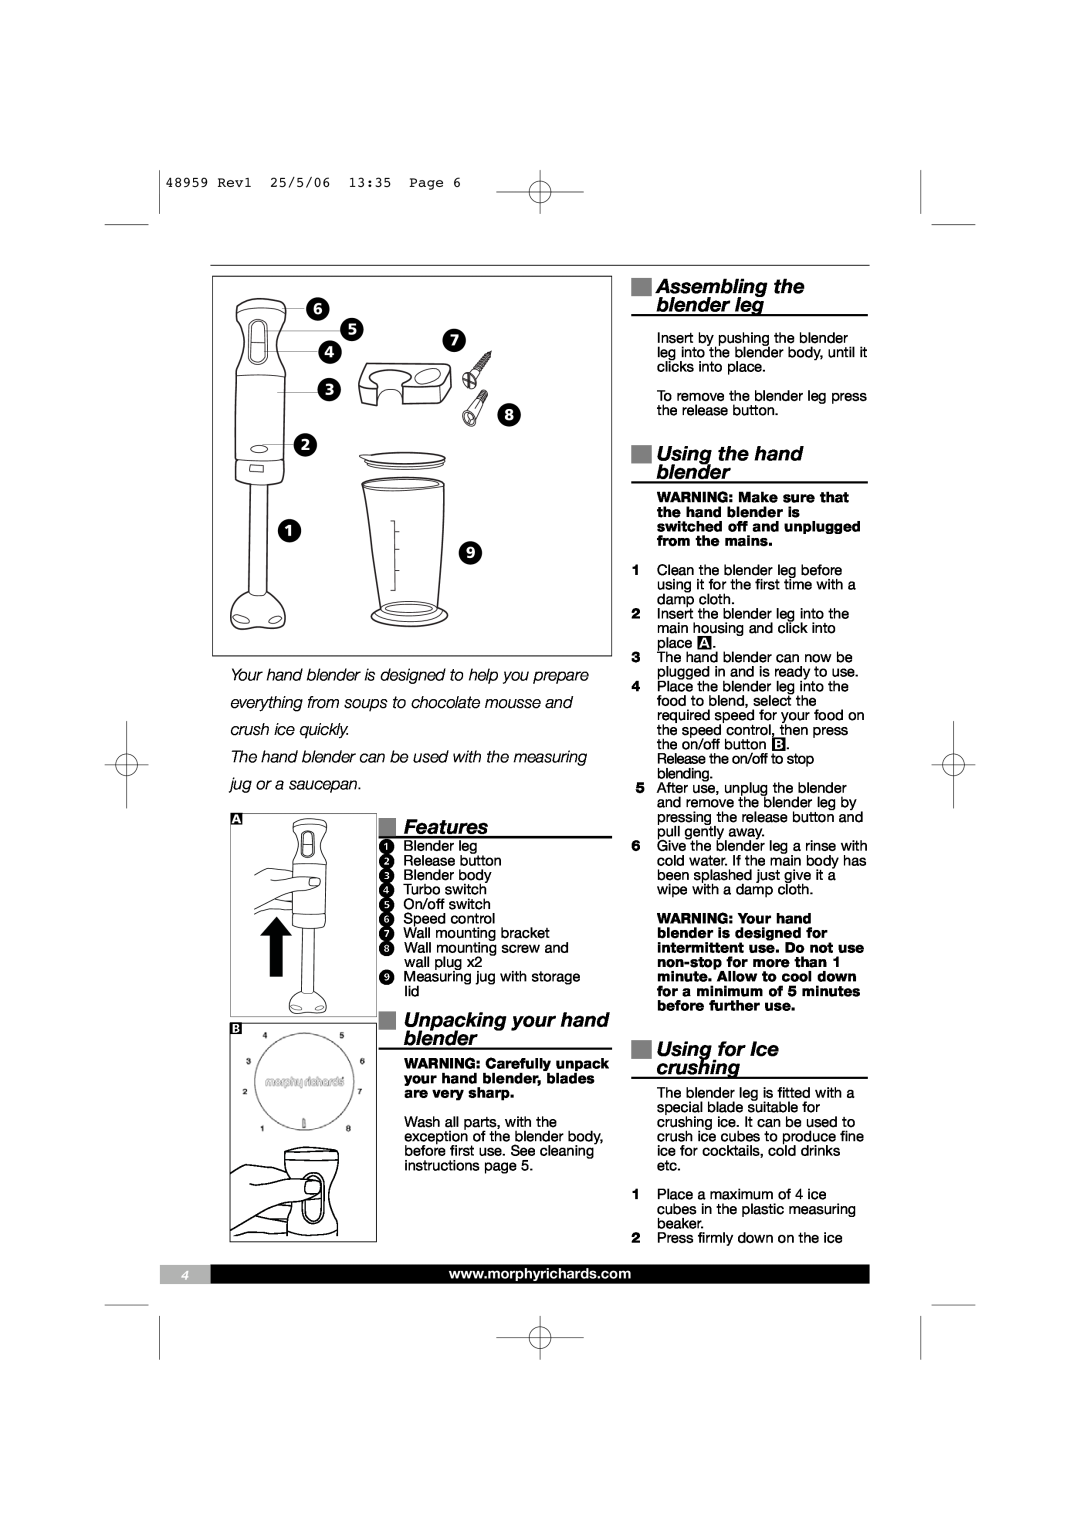 Morphy Richards 48959 manual Features, Unpacking your hand, Assembling the blender leg, Using the hand blender 